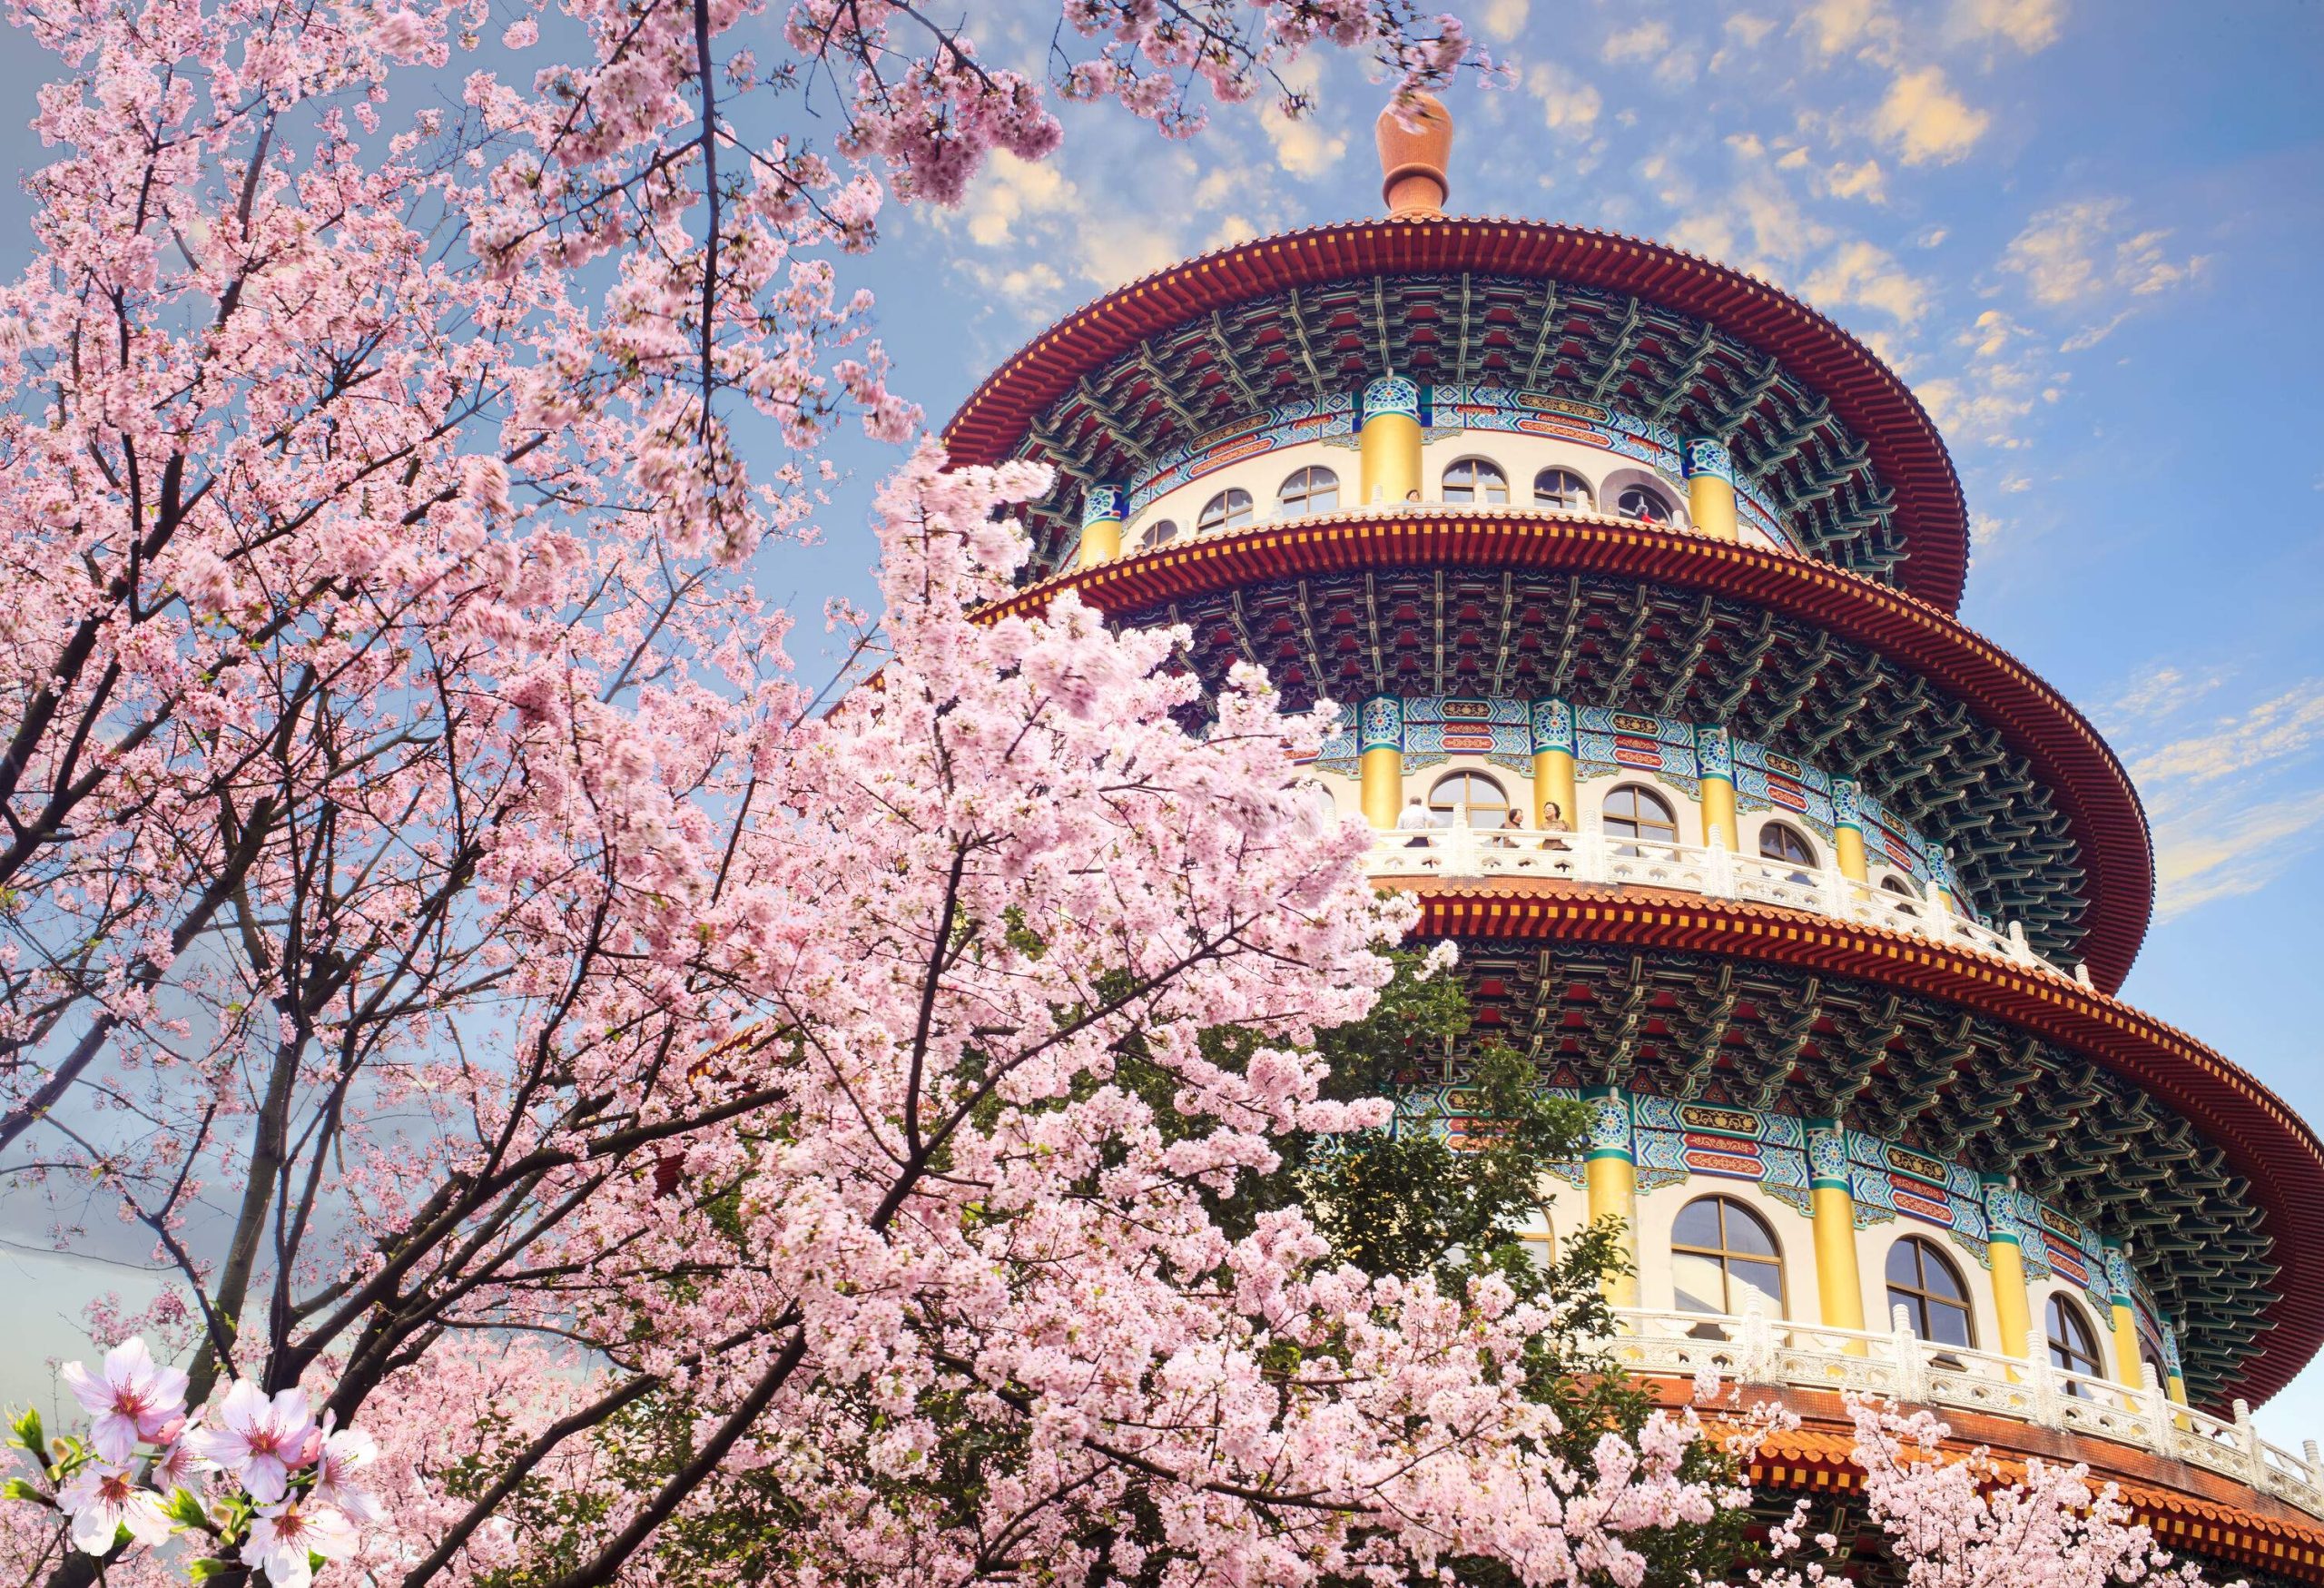 Lush cherry blossoms and a tiered round pagoda temple against a bright sky dotted with clouds.